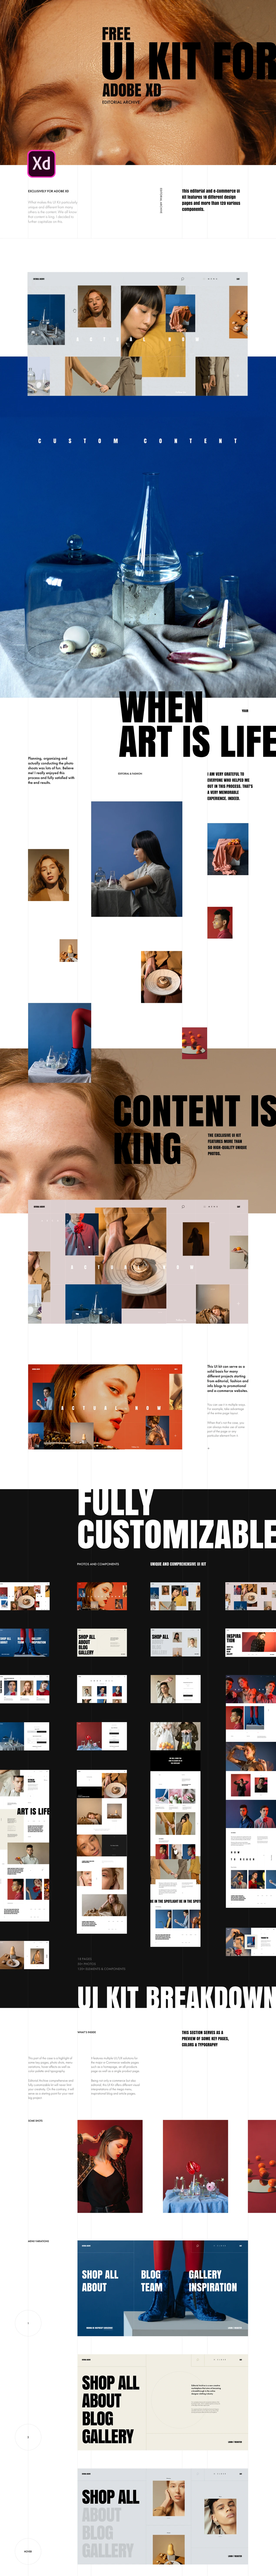 Fashion Editorial UI Kit for Adobe XD - This editorial and e-commerce UI Kit features 18 different design pages and more than 120 various components. This UI kit is built to help users create fashion editorial, as well as designer marketplace, apps, and websites. It features elements for a homepage, product grid, single product page, and blog.